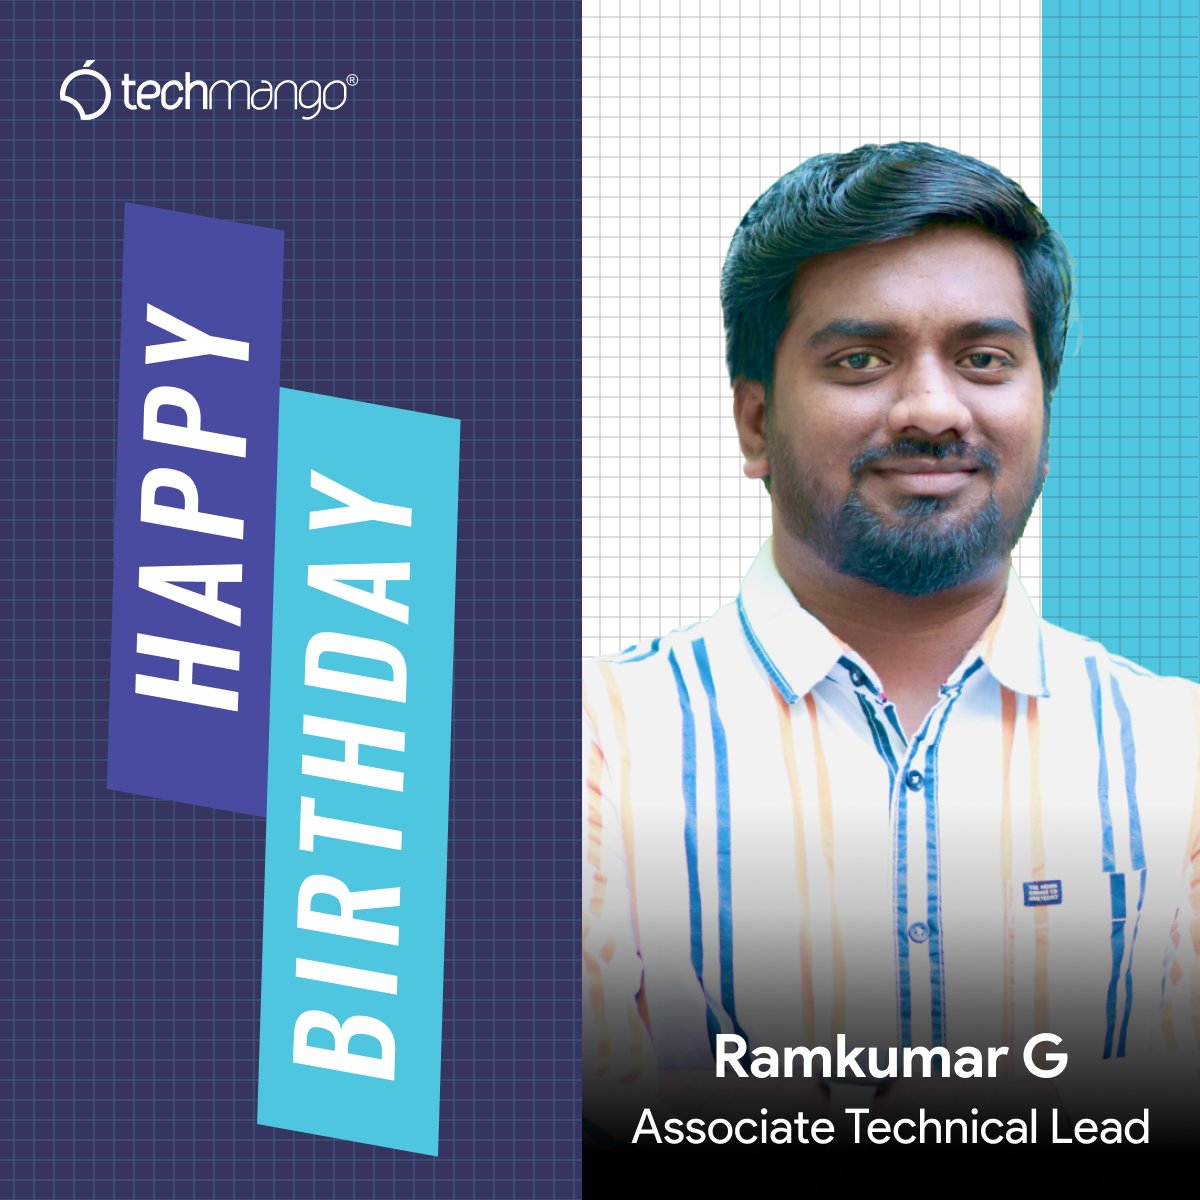 Techmango Wishes a Happy Birthday to Ramkumar Gopal Cheers to another fantastic year ahead! May this birthday be the start of your greatest, most wonderful journey yet. Have a fantastic day! #happybirthday #birthdaywishes #birthdaycelebration #birthdayparty #birthdaycheers